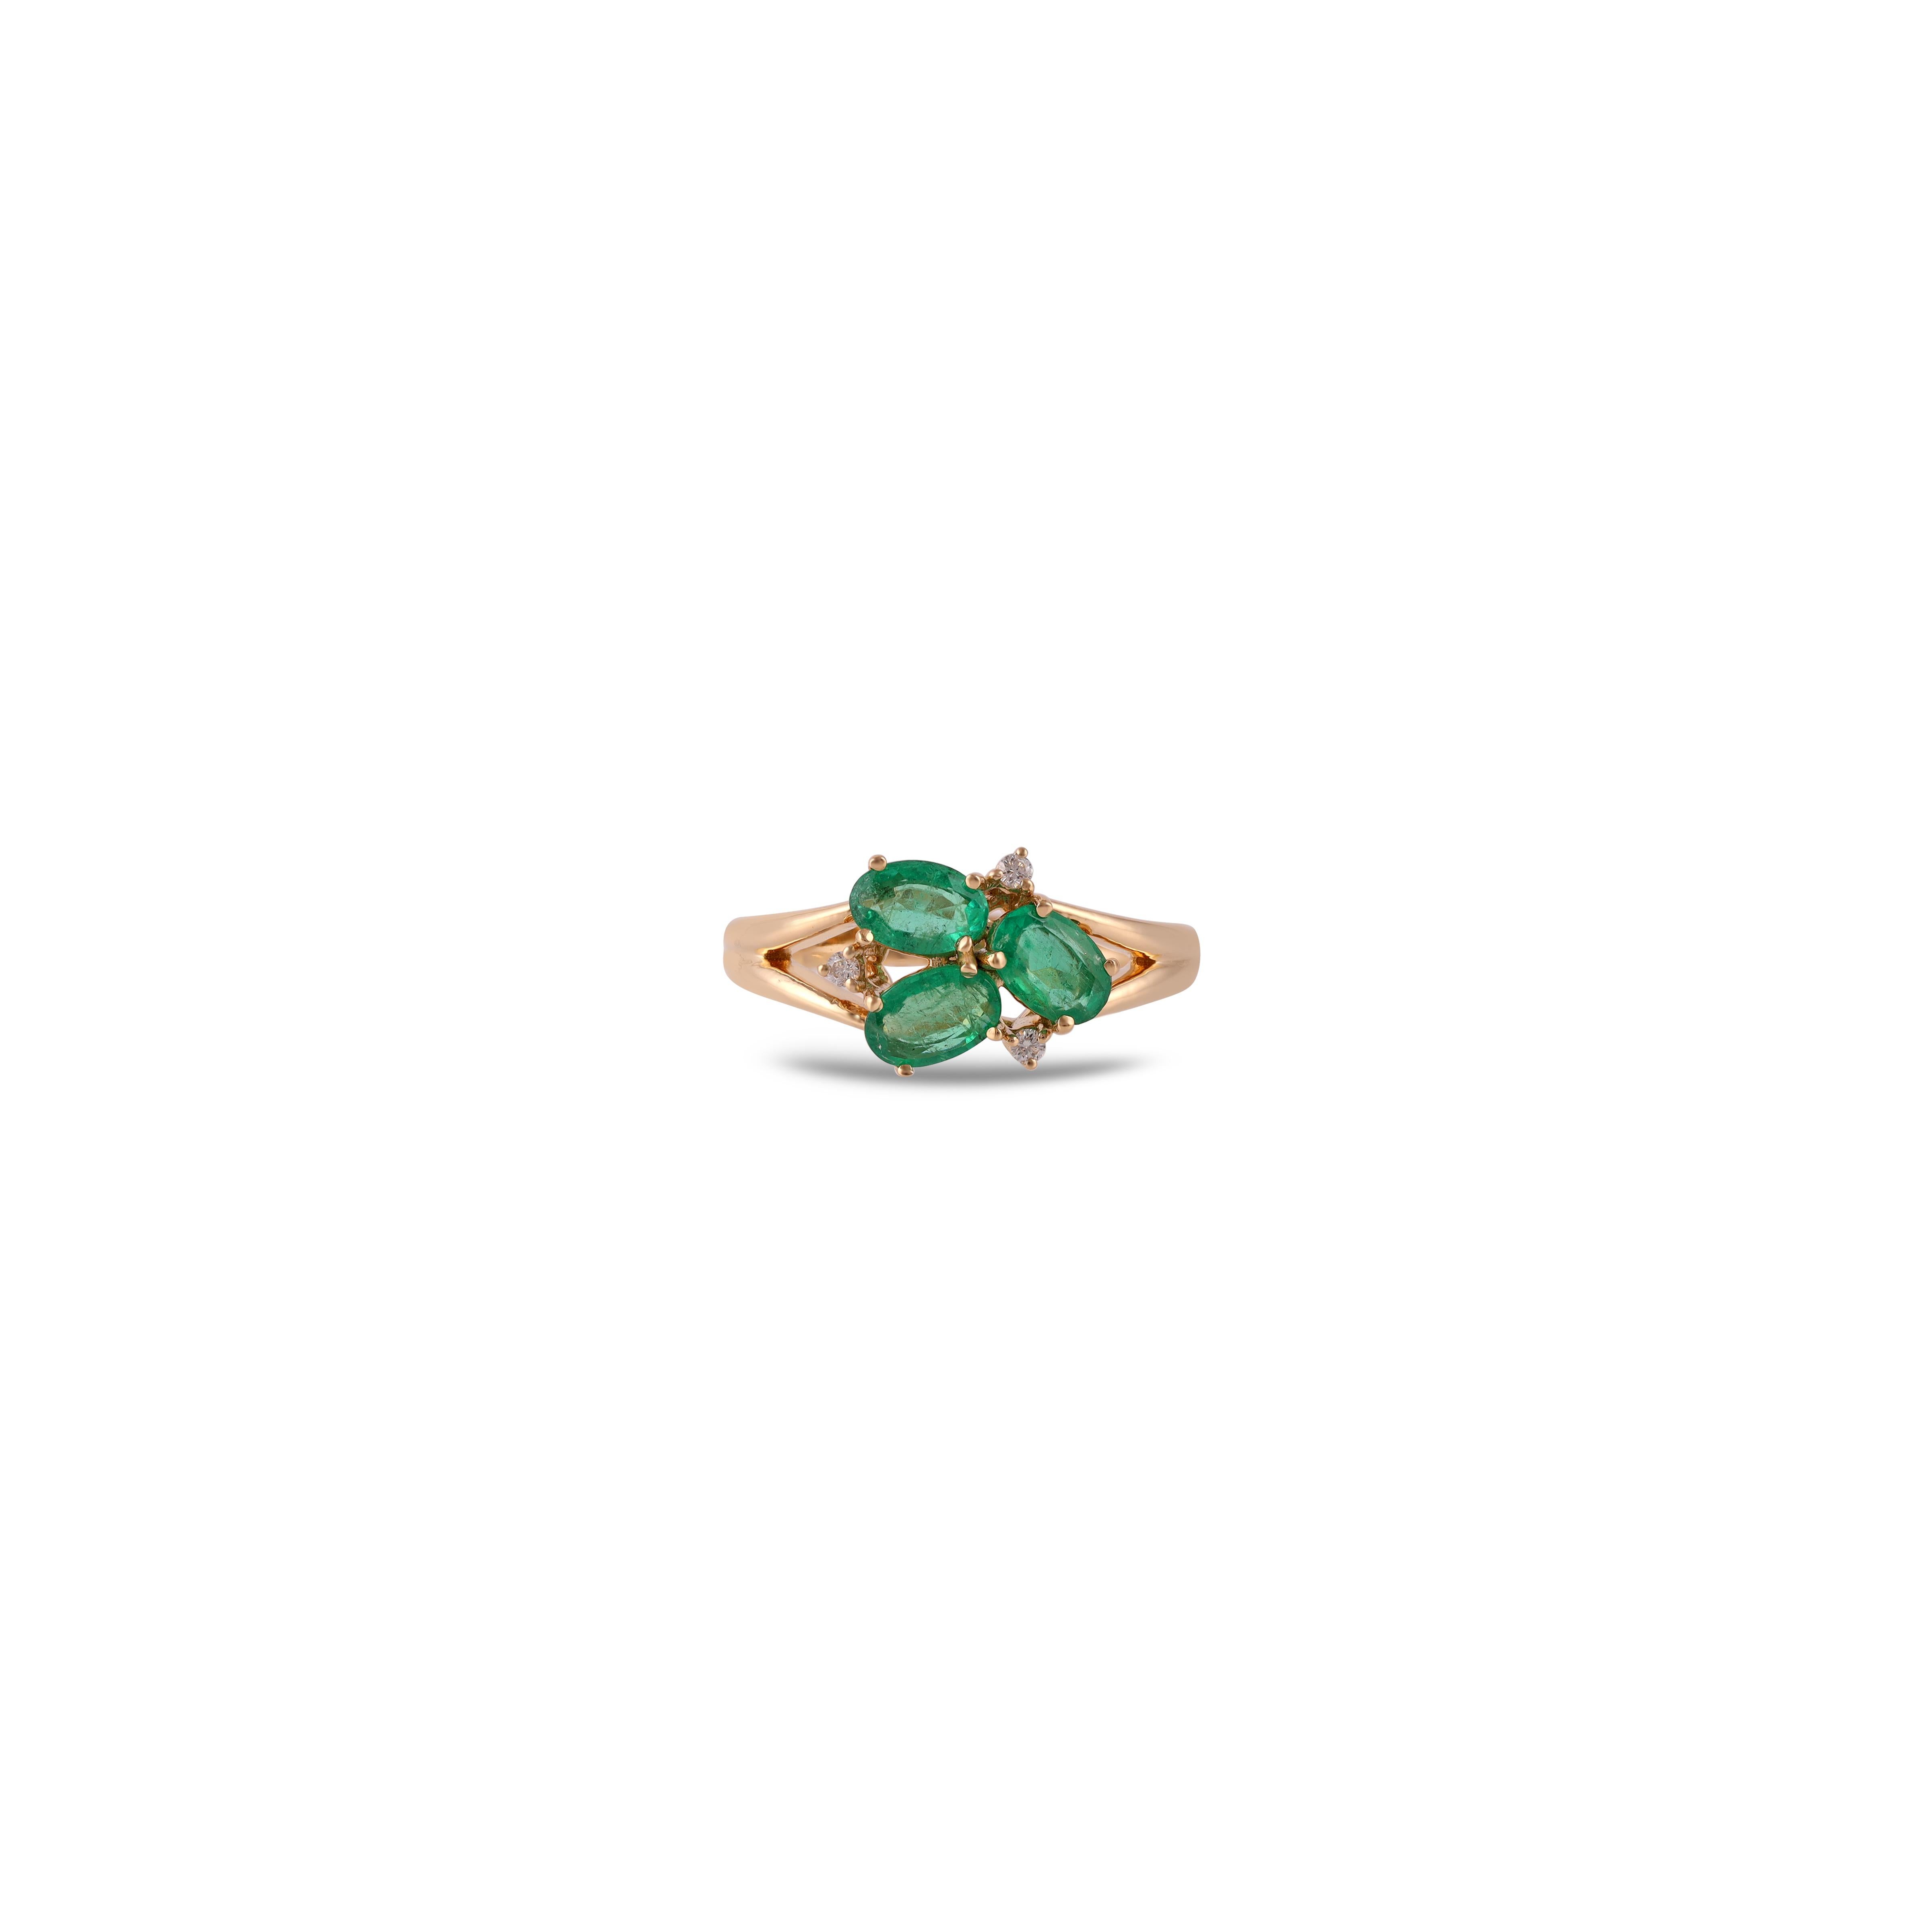 Magnificent  Emerald ring.  
Emerald & Diamond Ring 18K Yellow Gold 

 Emerald - 1.10 Carat
Diamond - 0.05 Carat
18 Karat Yellow Gold




Custom Services
Resizing is available.
Request Customization
